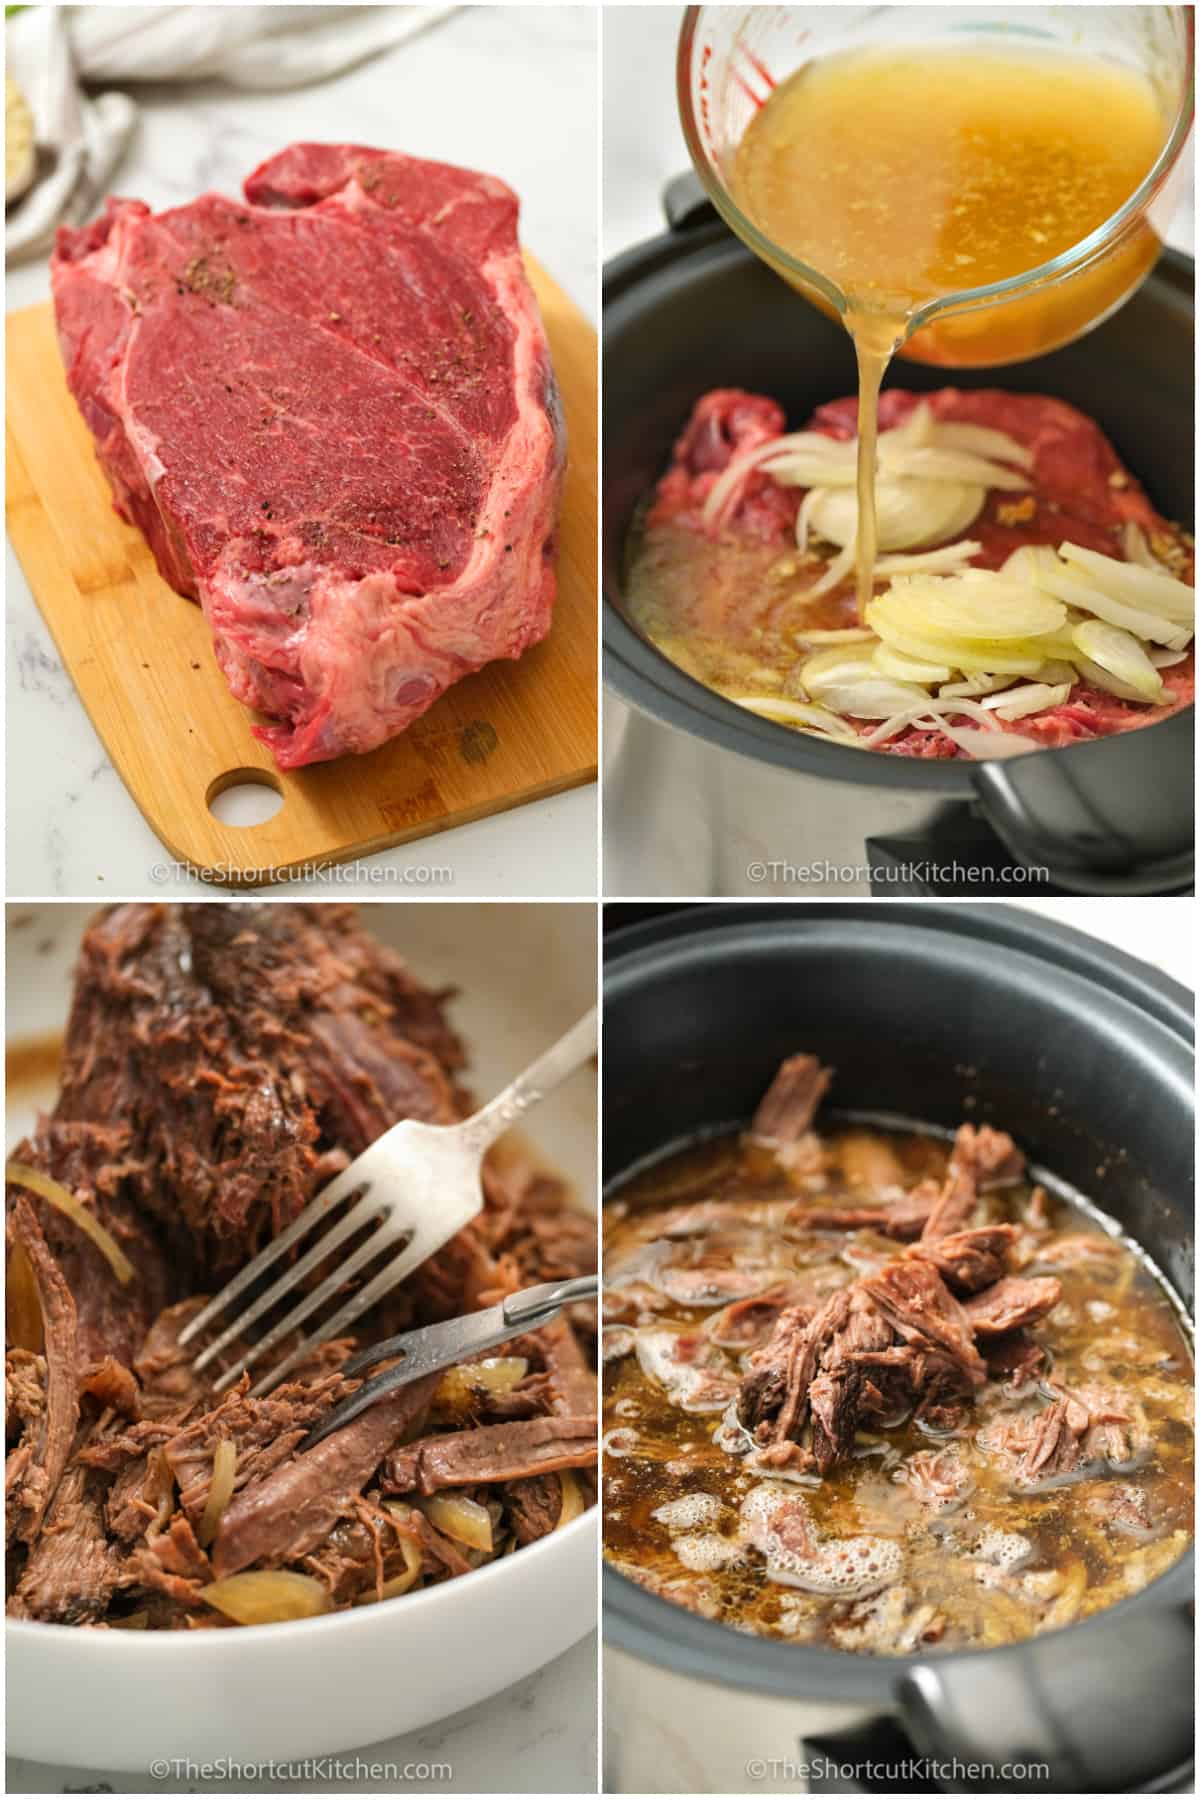 process of adding ingredients to slow cooker and shredding beef to make Crock Pot French Dip Recipe